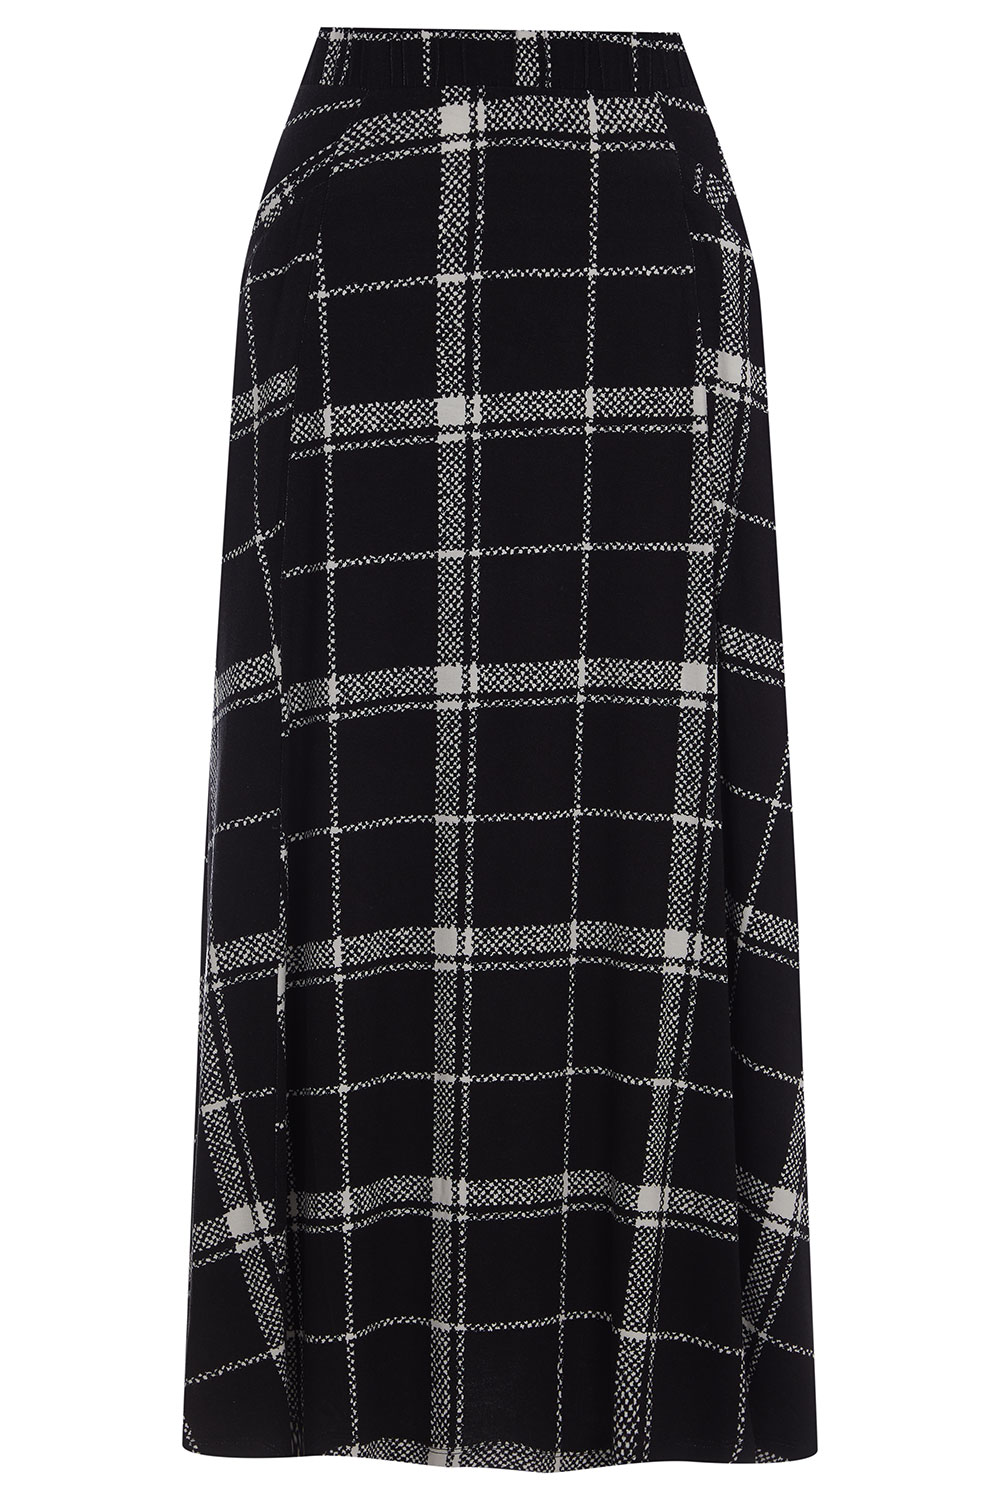 Checked Print Midi Jersey Skirt with Pocket Detail | Bonmarché